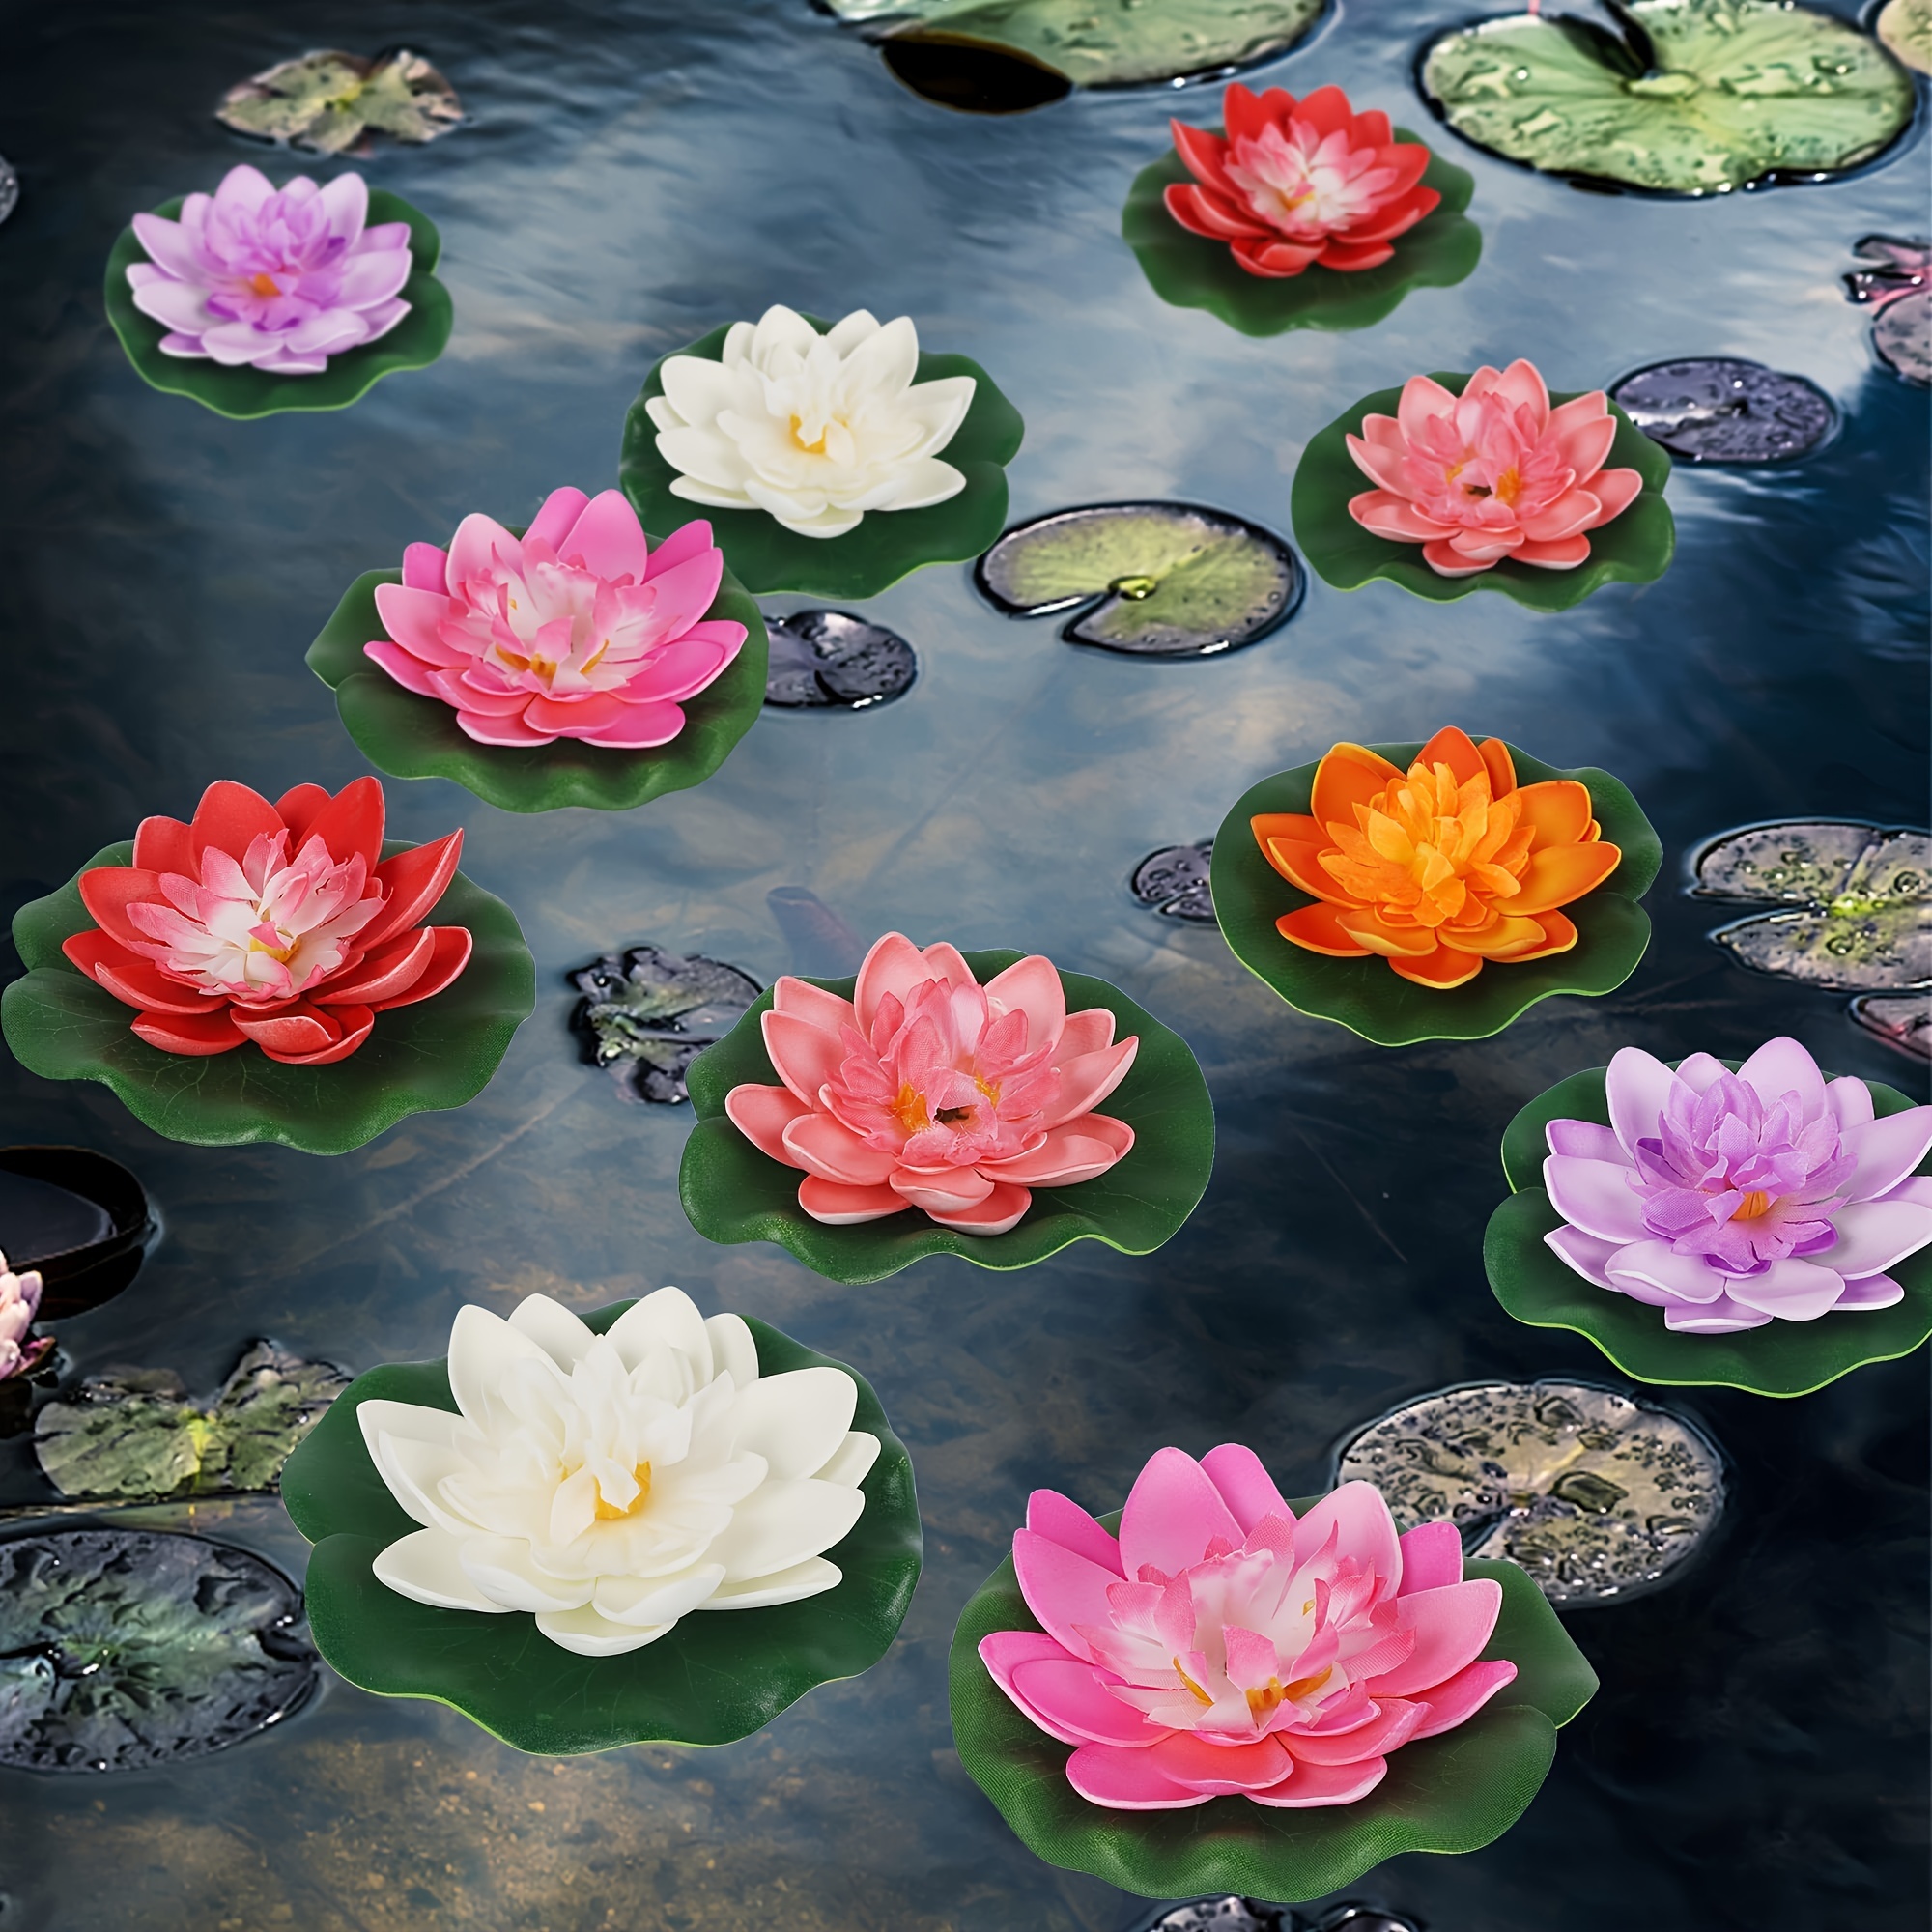 

Eva Foam Artificial Floating Lotus Flowers With Lily Pads - 6pcs/12pcs Set, Lifelike Pond Decor For Home & Garden, Ideal For Diwali Decorations & Return Gifts